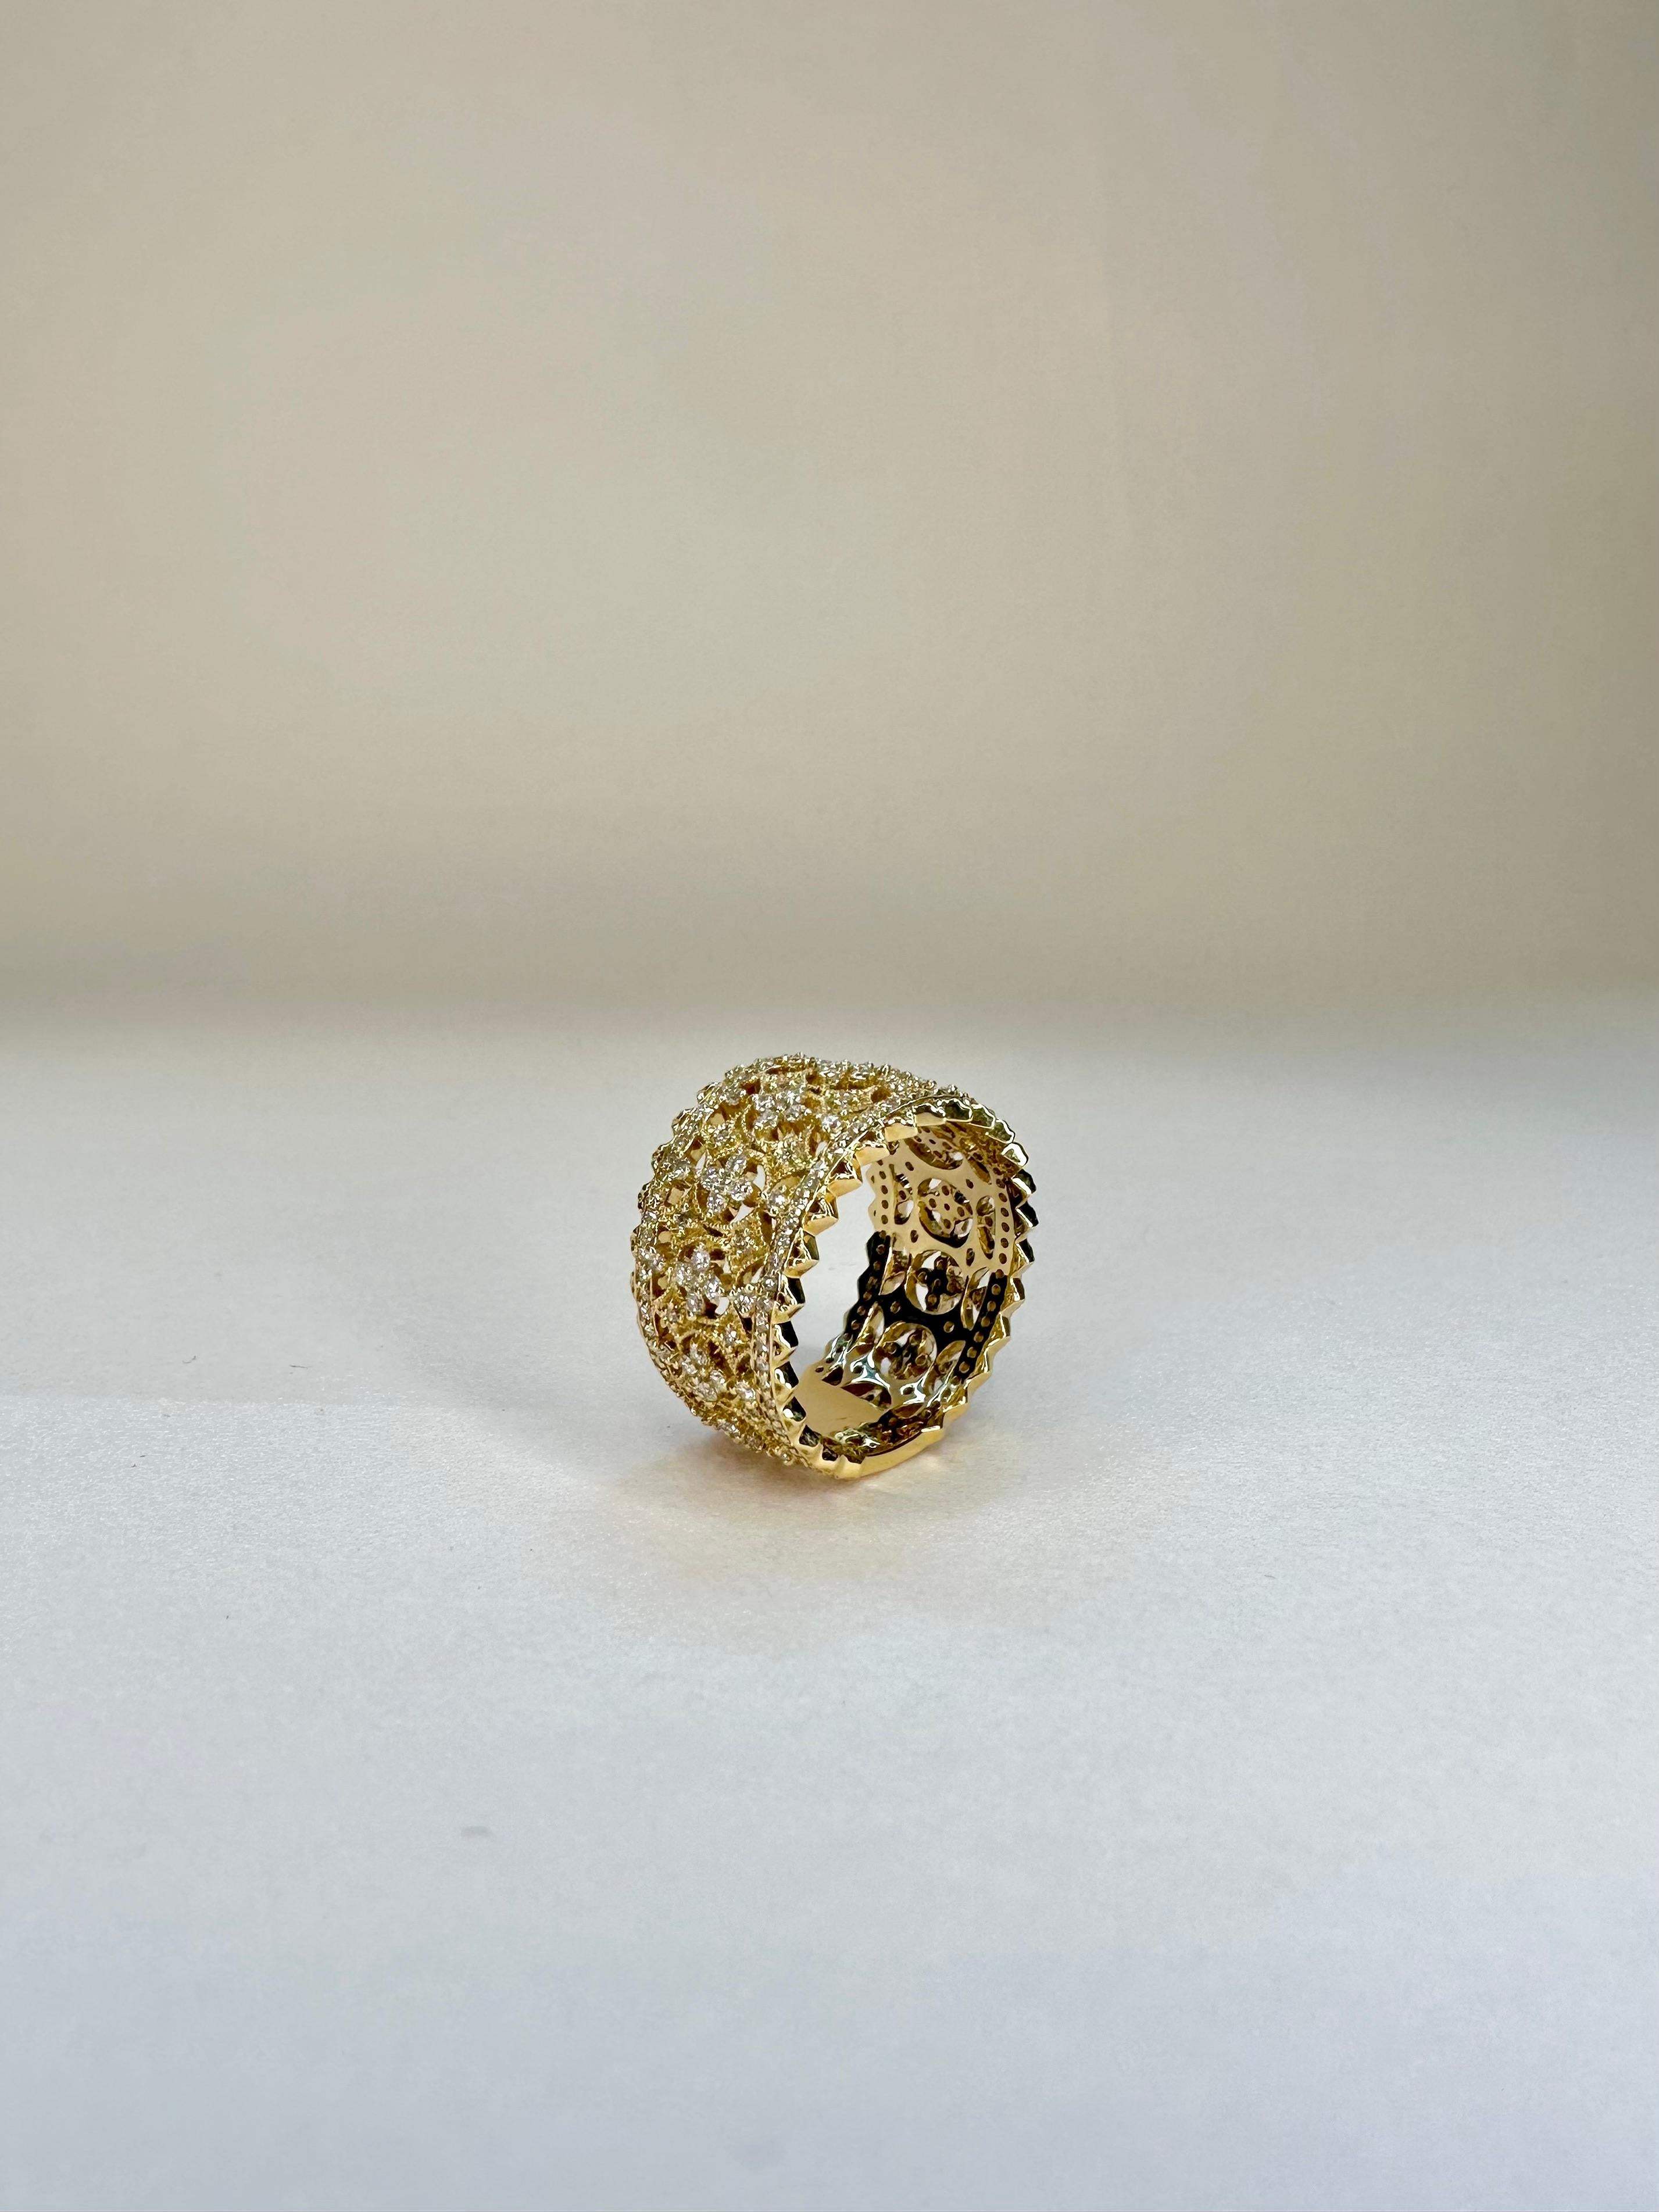 For Sale:  18k Yellow Gold Lace Band Ring With 1.10 Carats Of Diamonds Milgrain Setting 6